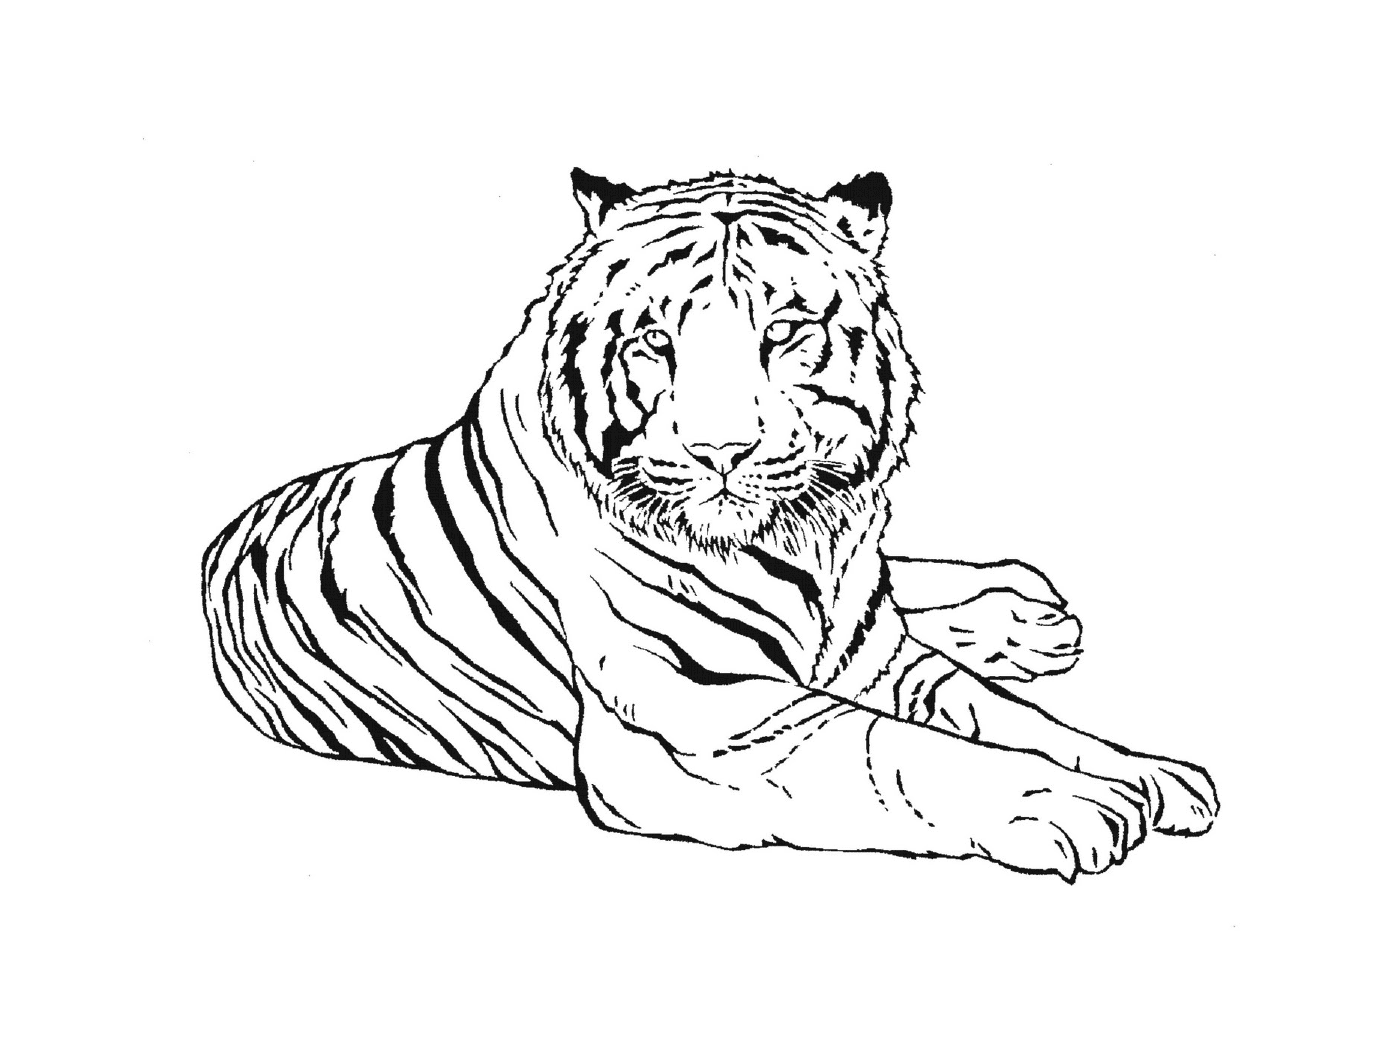  A tiger from the region of Buenos Aires 